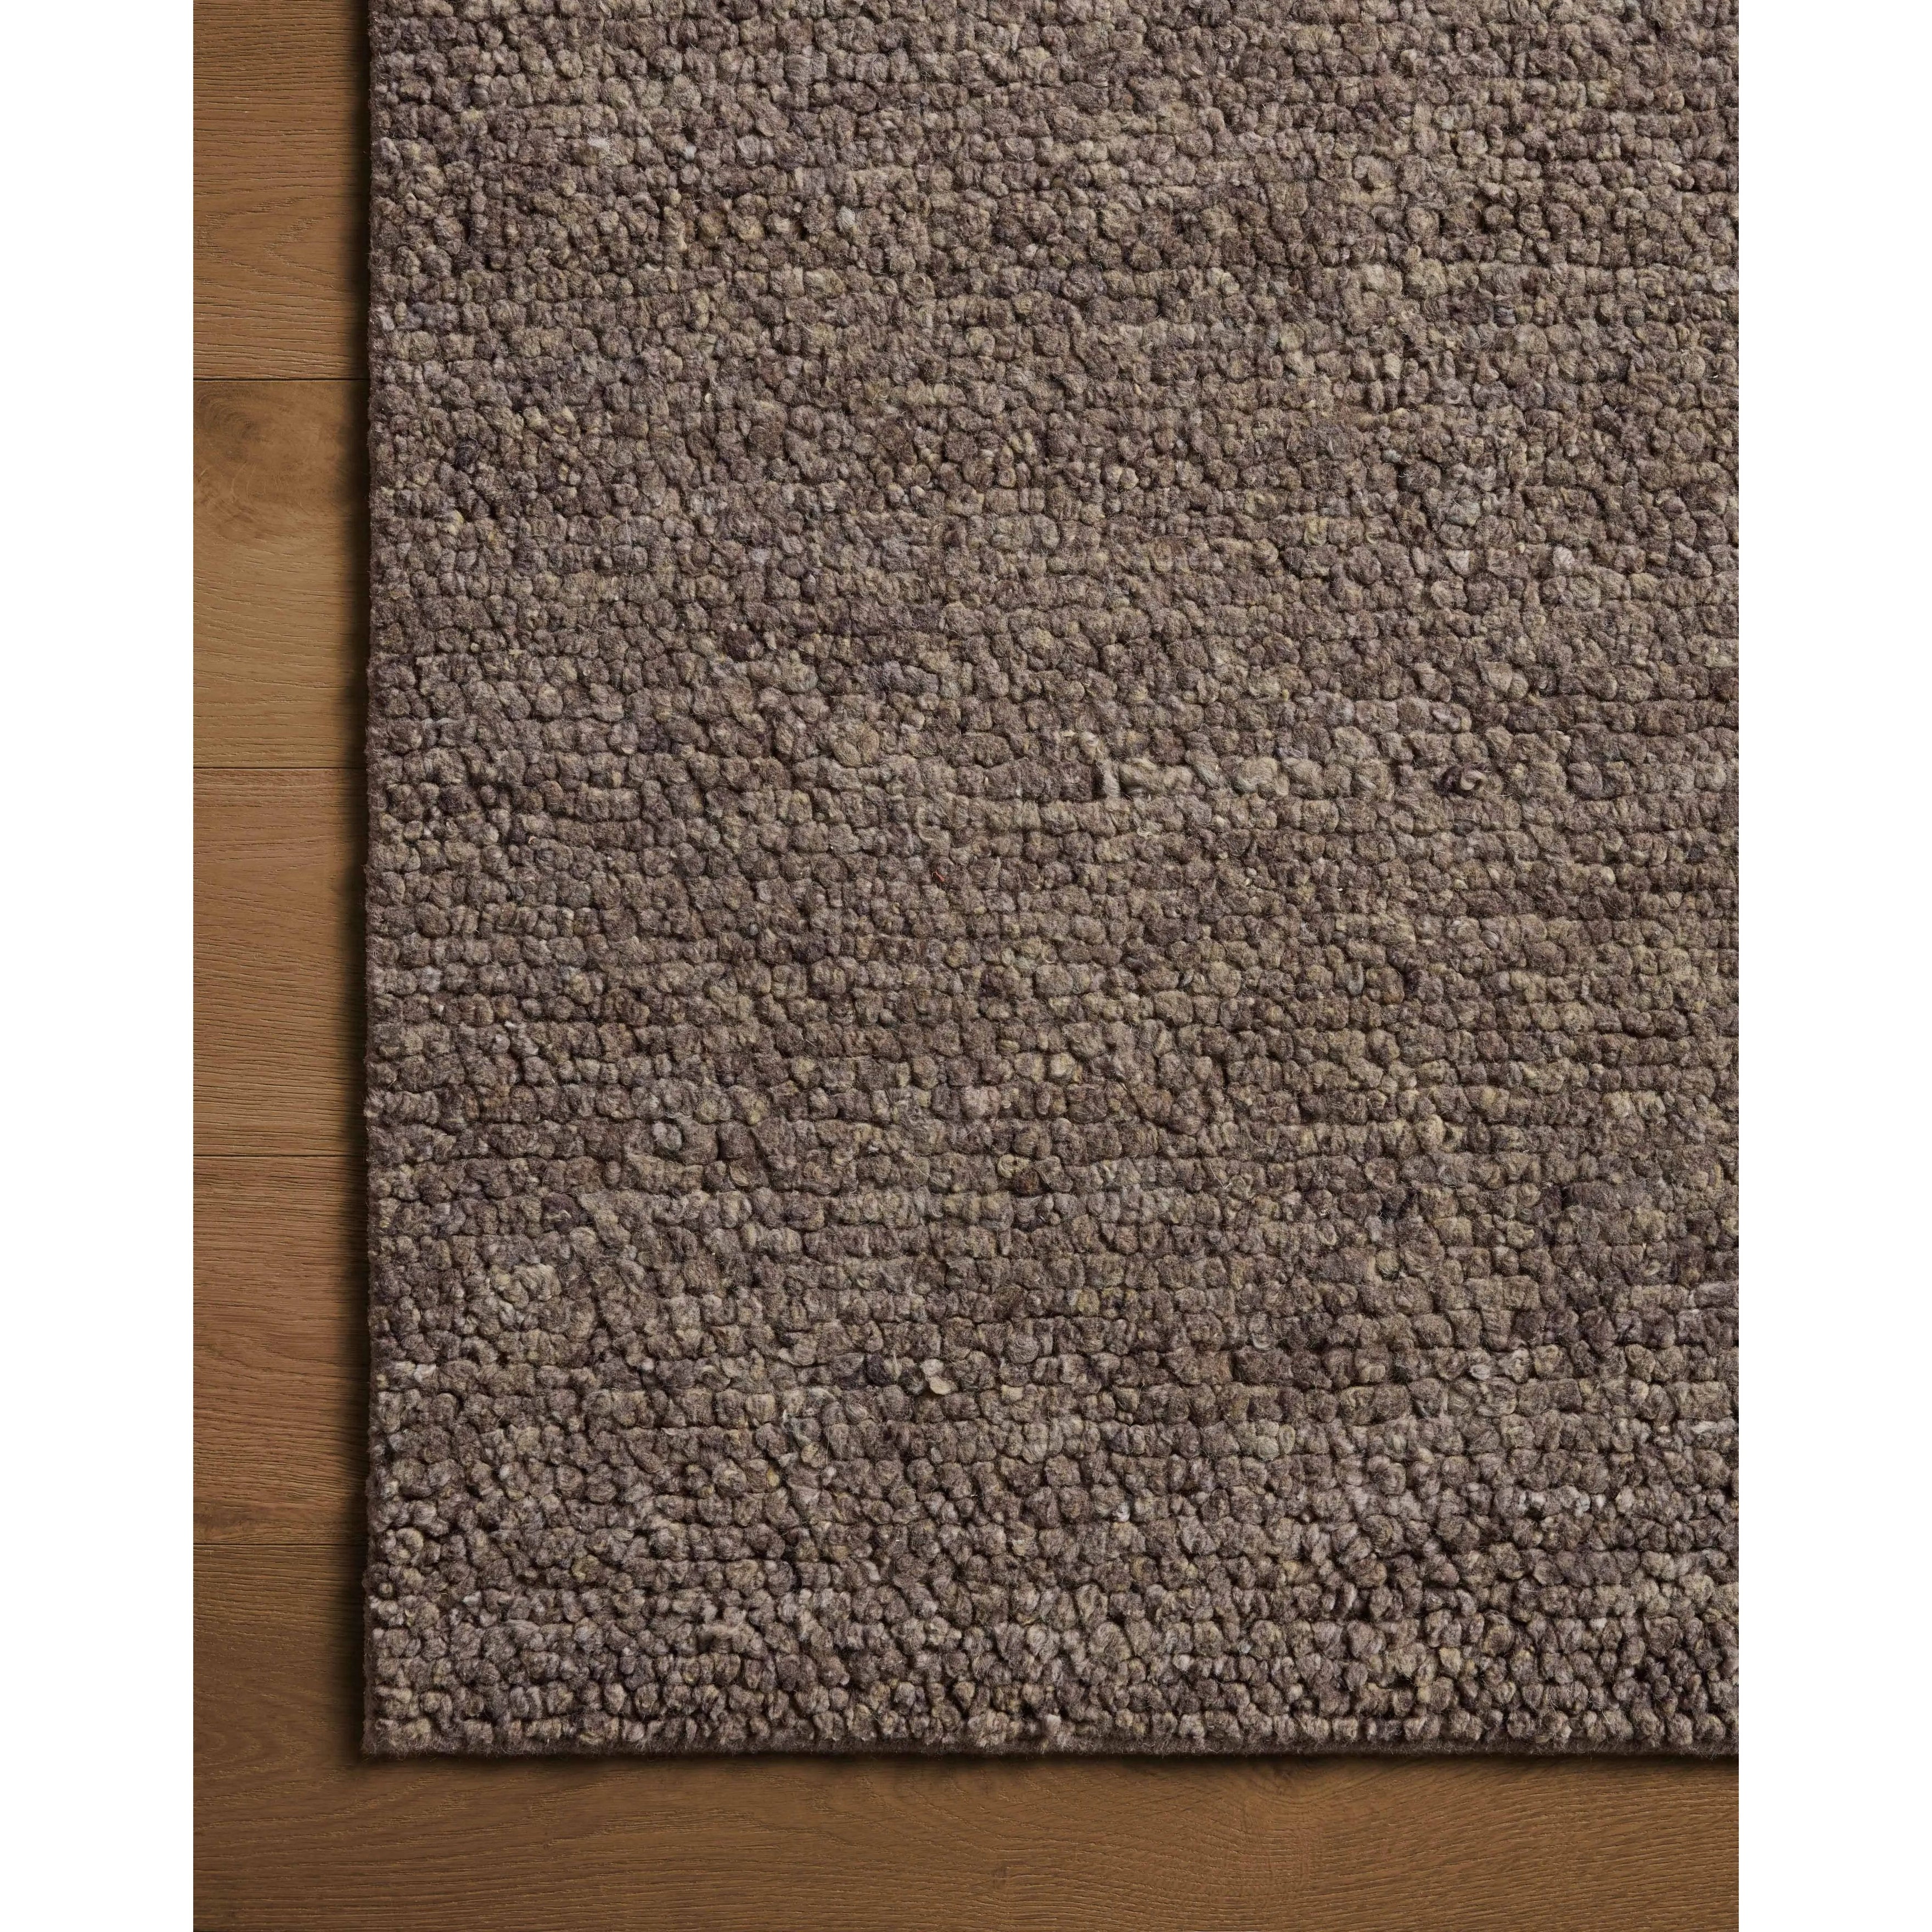 With versatile earth tones and a chunky, hand-knotted texture resembling tiny pebbles, the Frida Graphite Rug by Brigette Romanek x Loloi can ground any room with a sense of elevated ease. Each area rug features a subtle nuance in color variation due to the handmade nature of its construction and has a pleasantly nubby softness underfoot. Amethyst Home provides interior design, new home construction design consulting, vintage area rugs, and lighting in the Washington metro area.